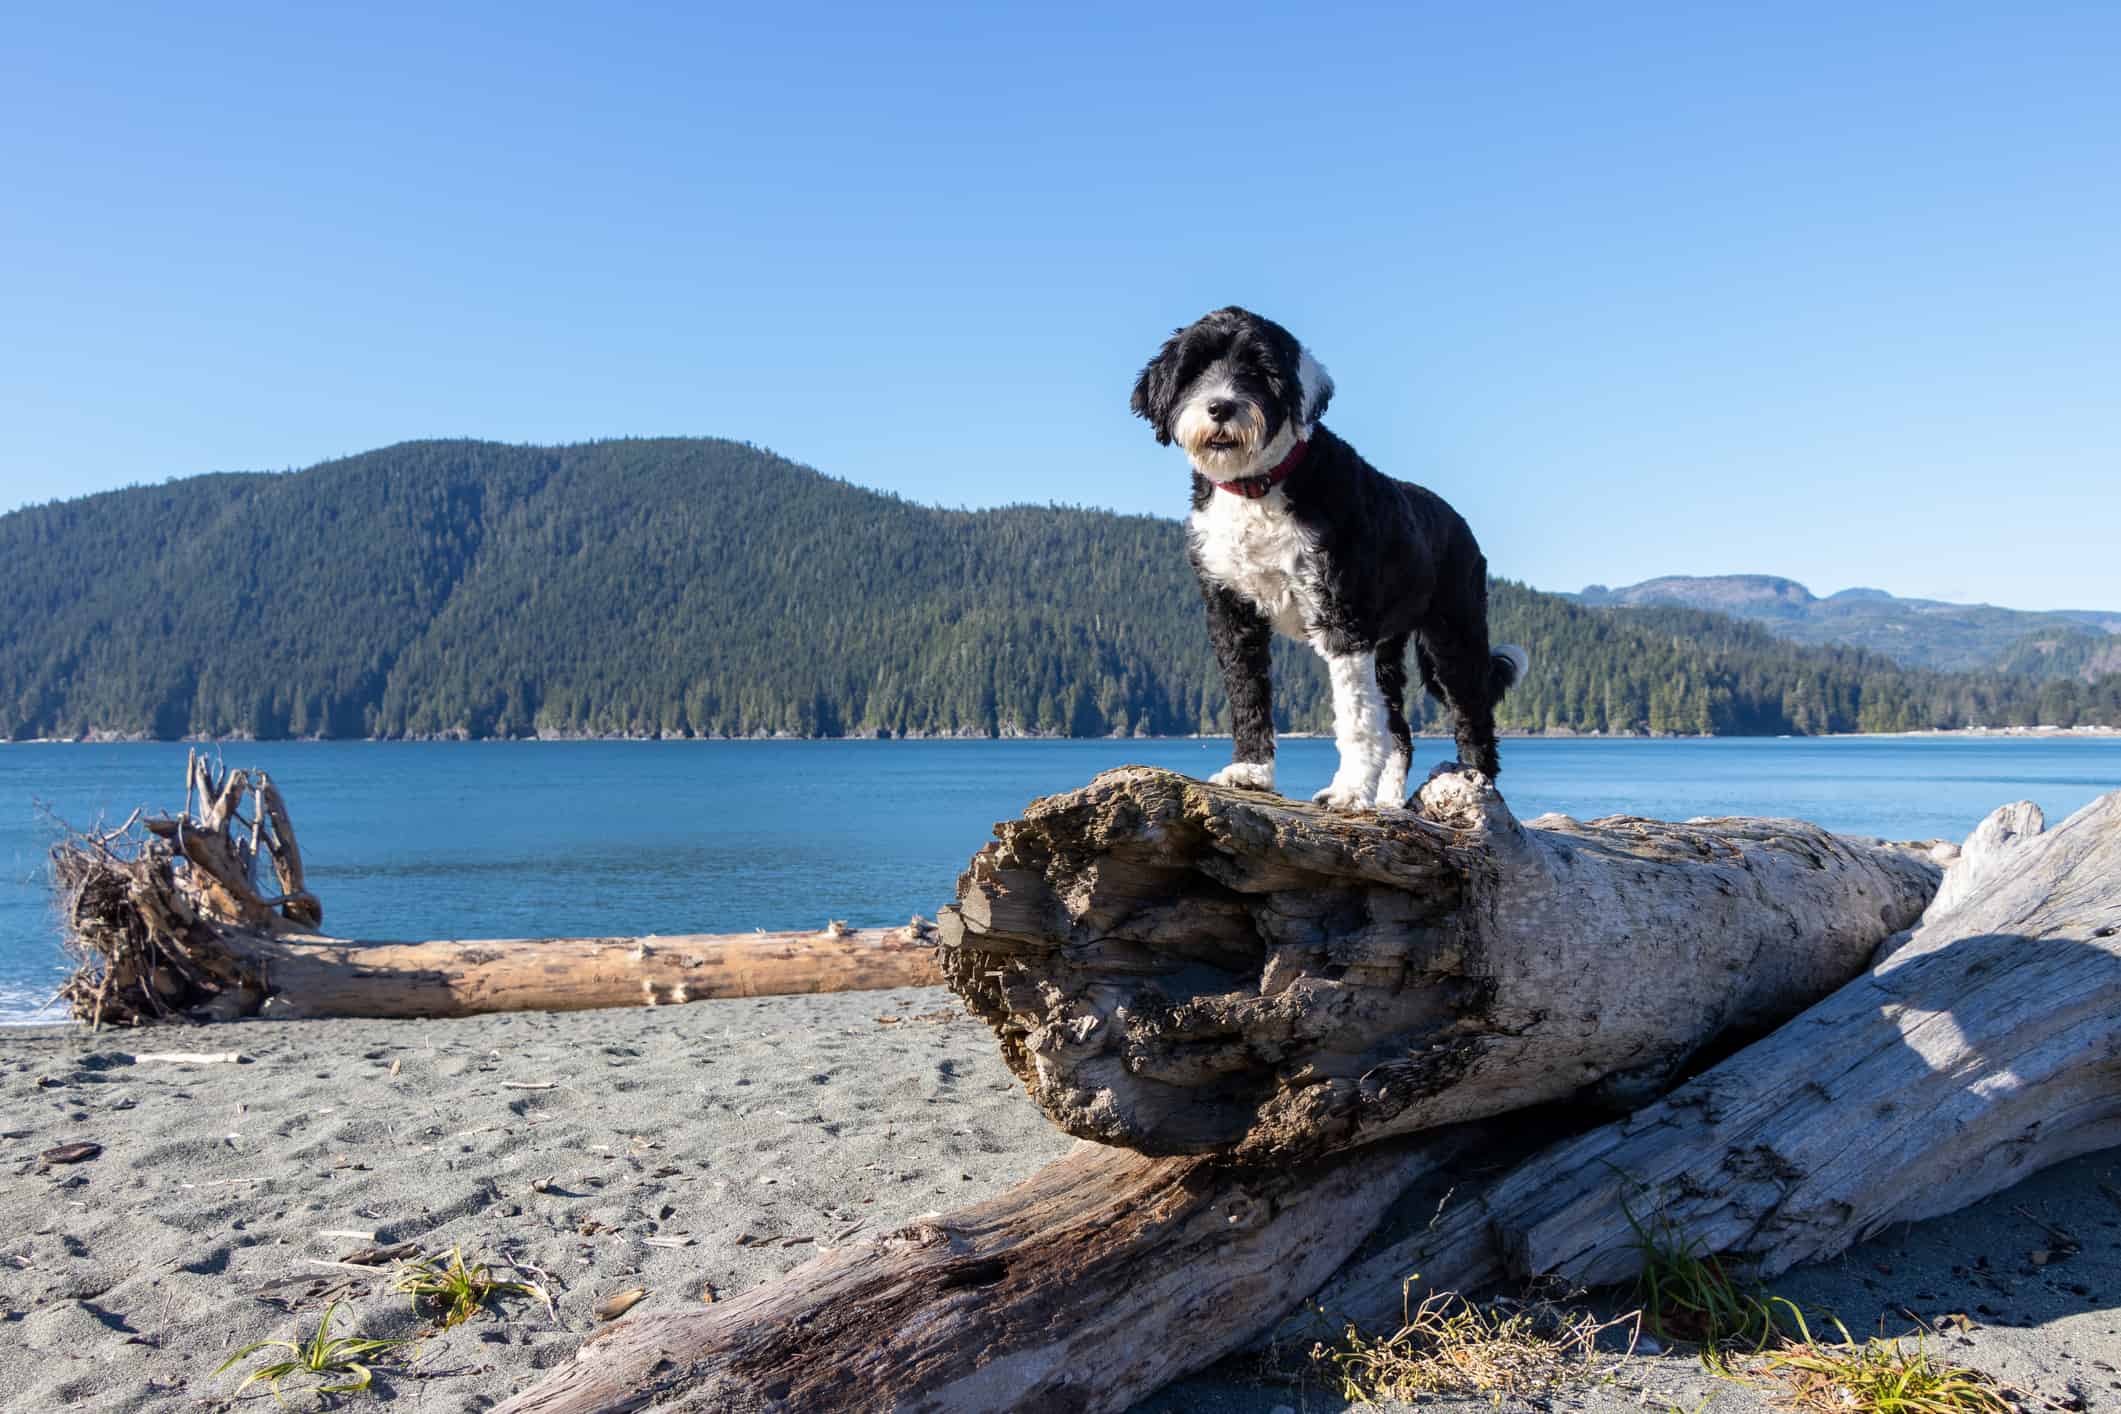 Portuguese water dog standing on driftwood log at beach